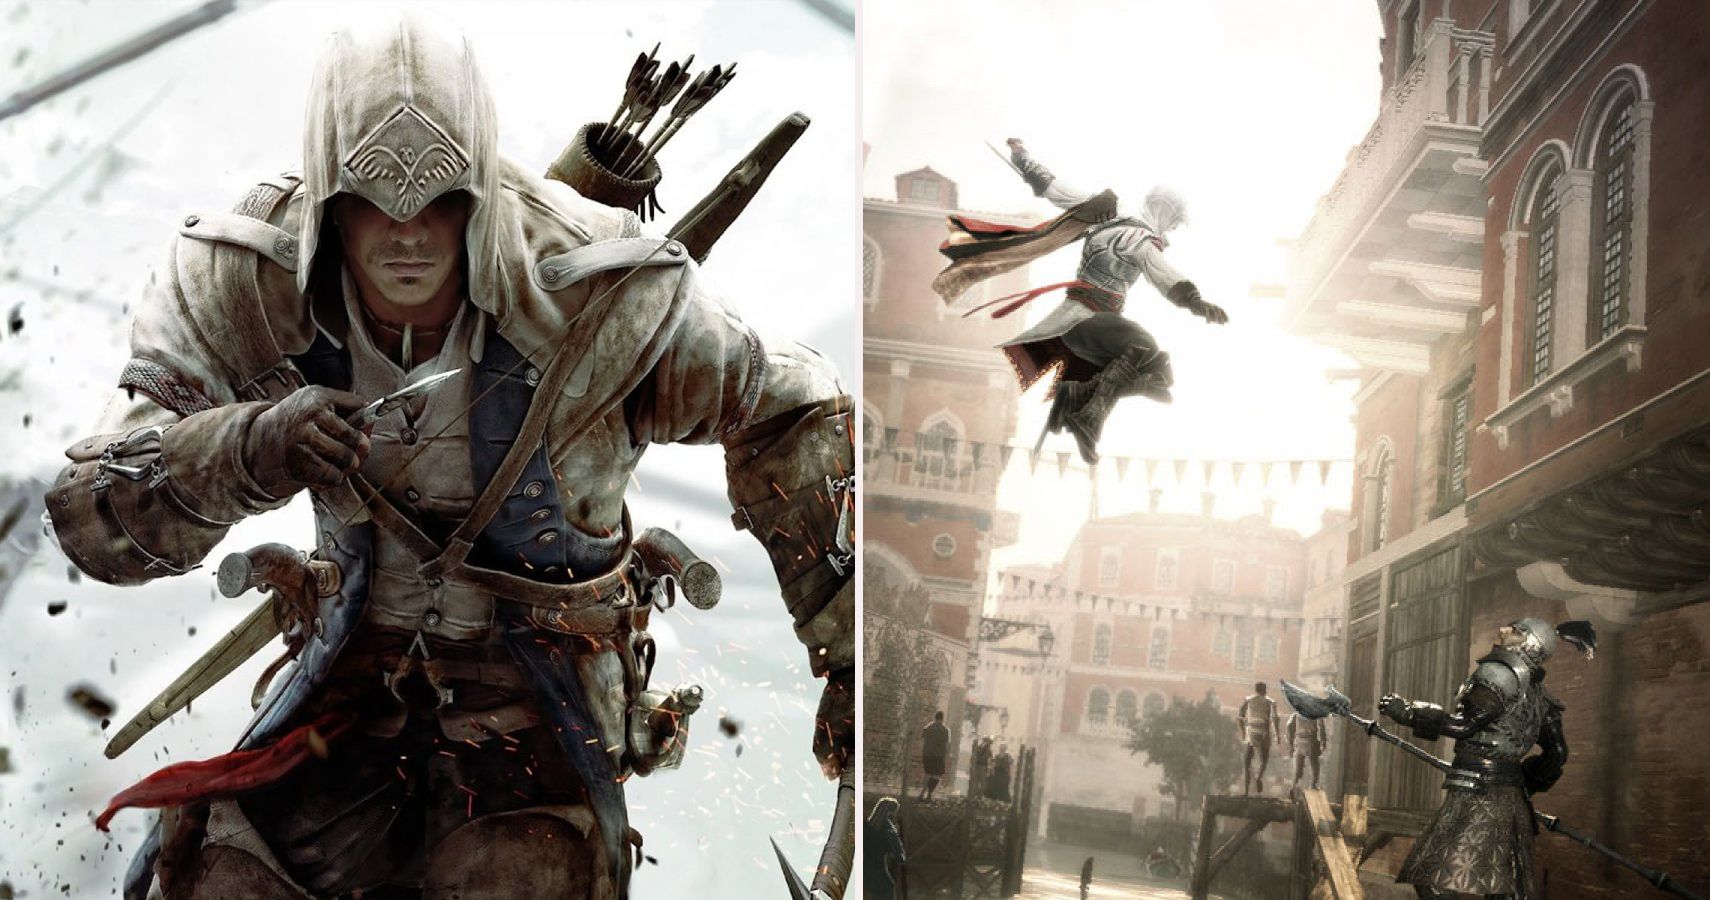 Assassin's Creed Valhalla Review - A Refreshing And Barbaric Throwback